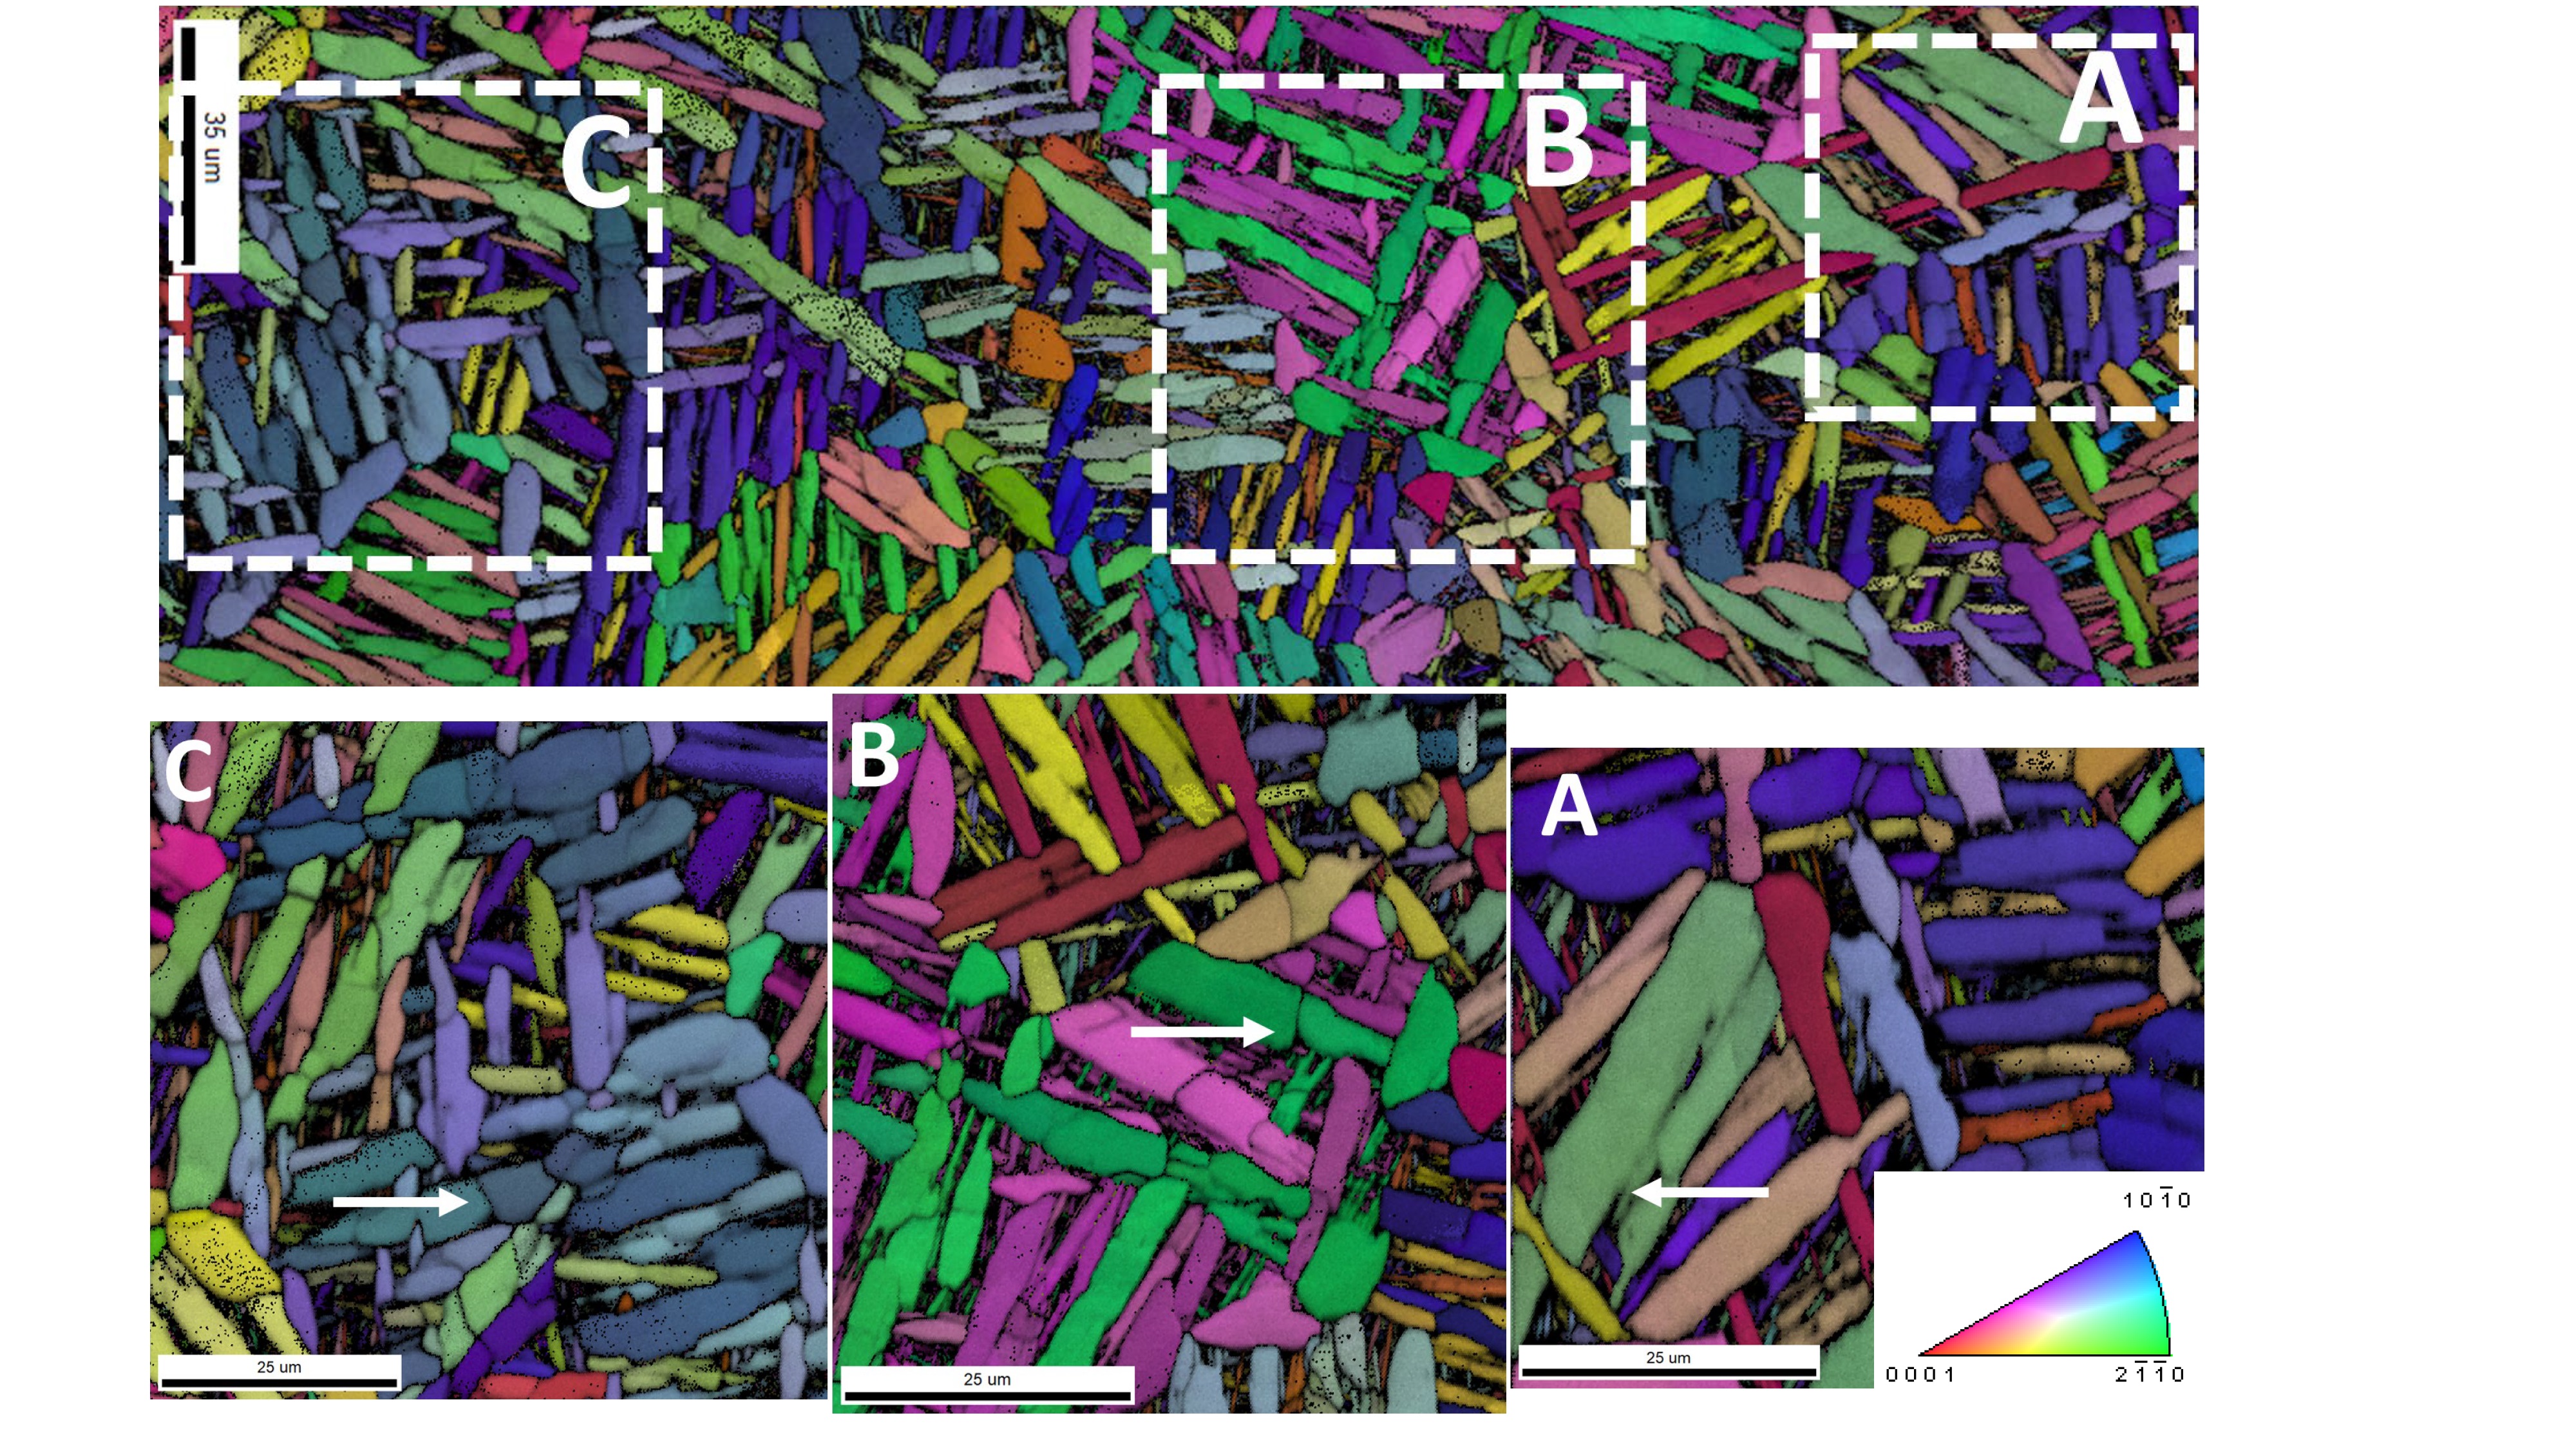 EBSD micrographs of additively manufactured Ti-6Al-4V after heat treatment